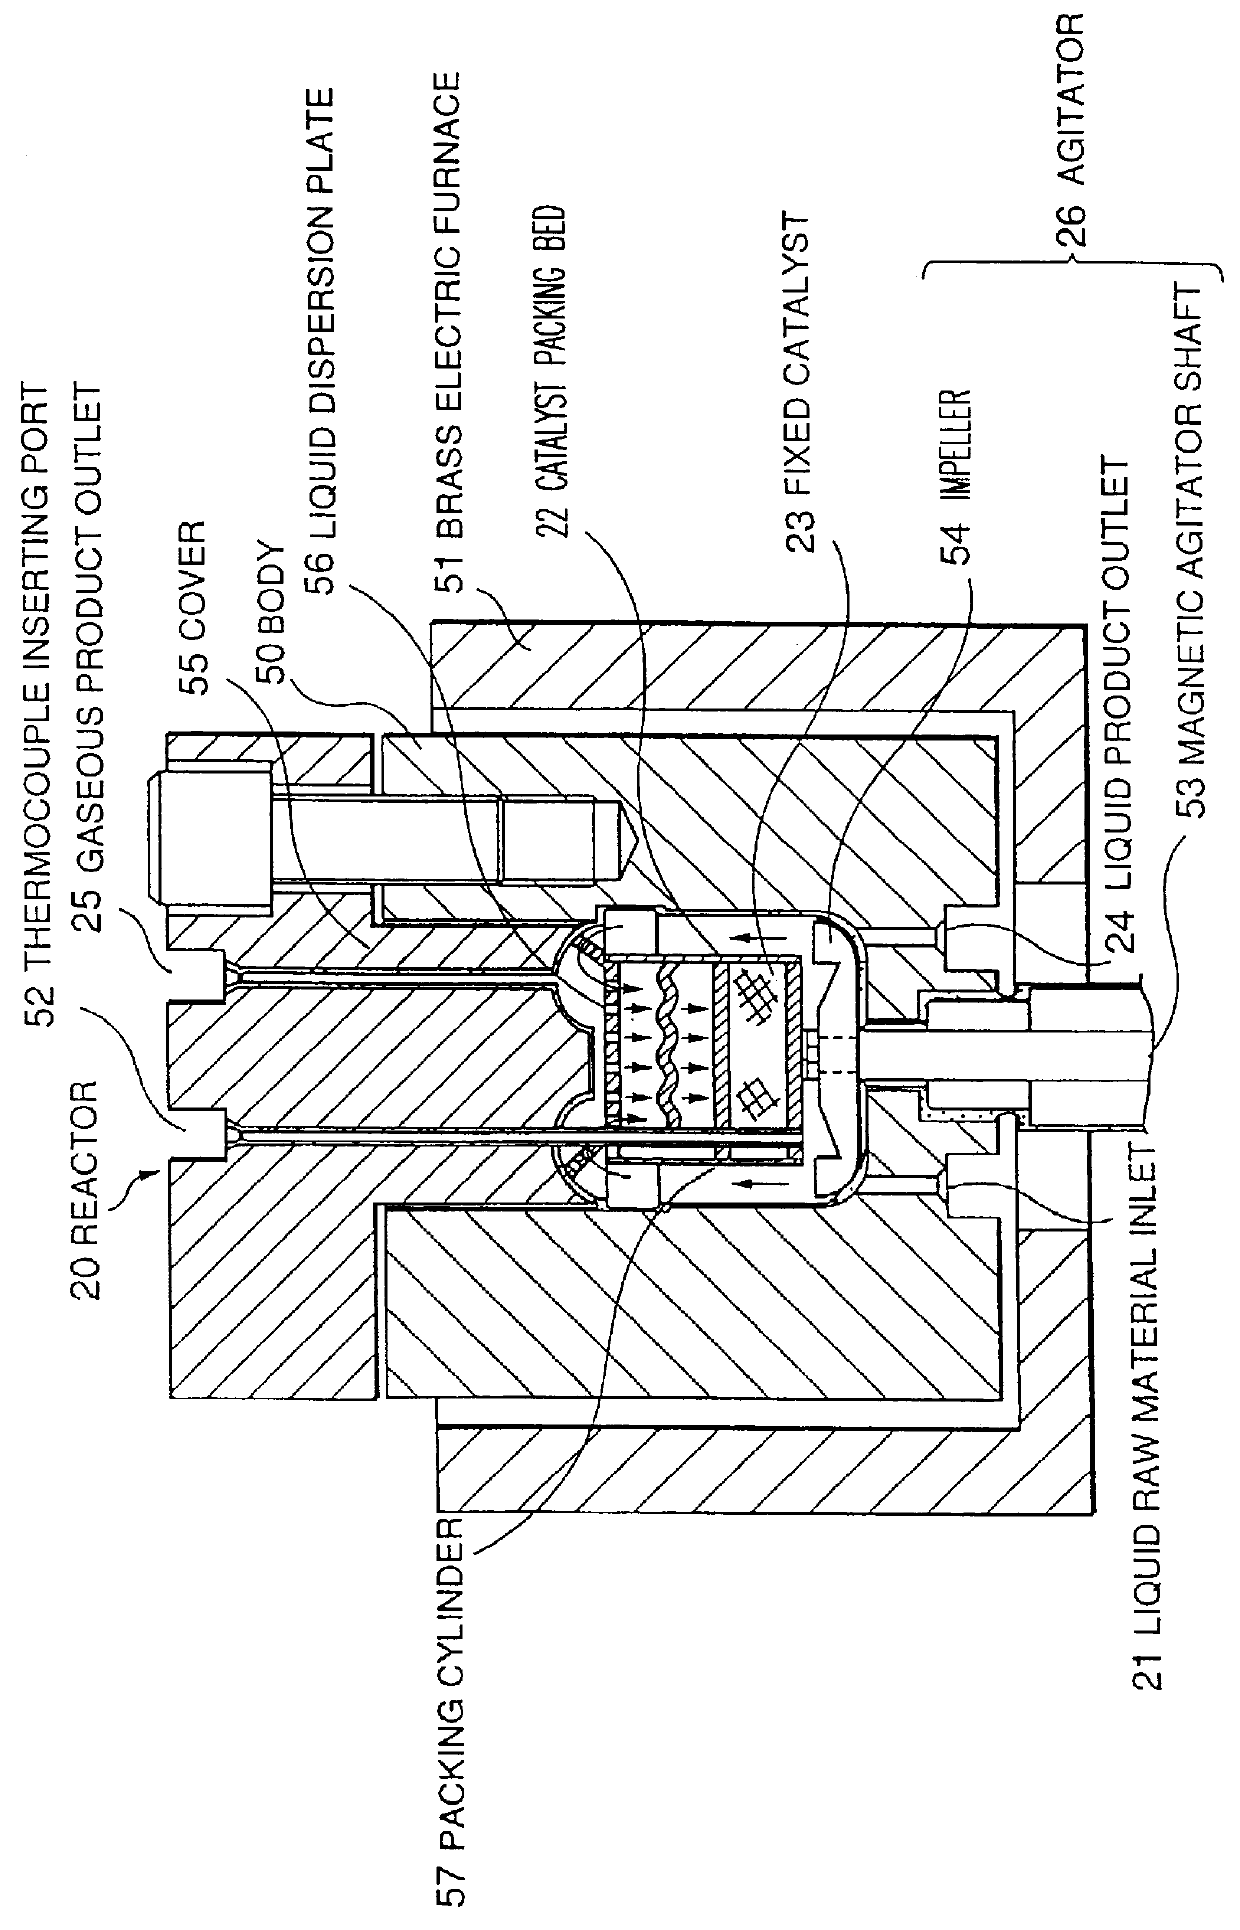 Apparatus for evaluating a solid catalyst and evaluation method using the apparatus